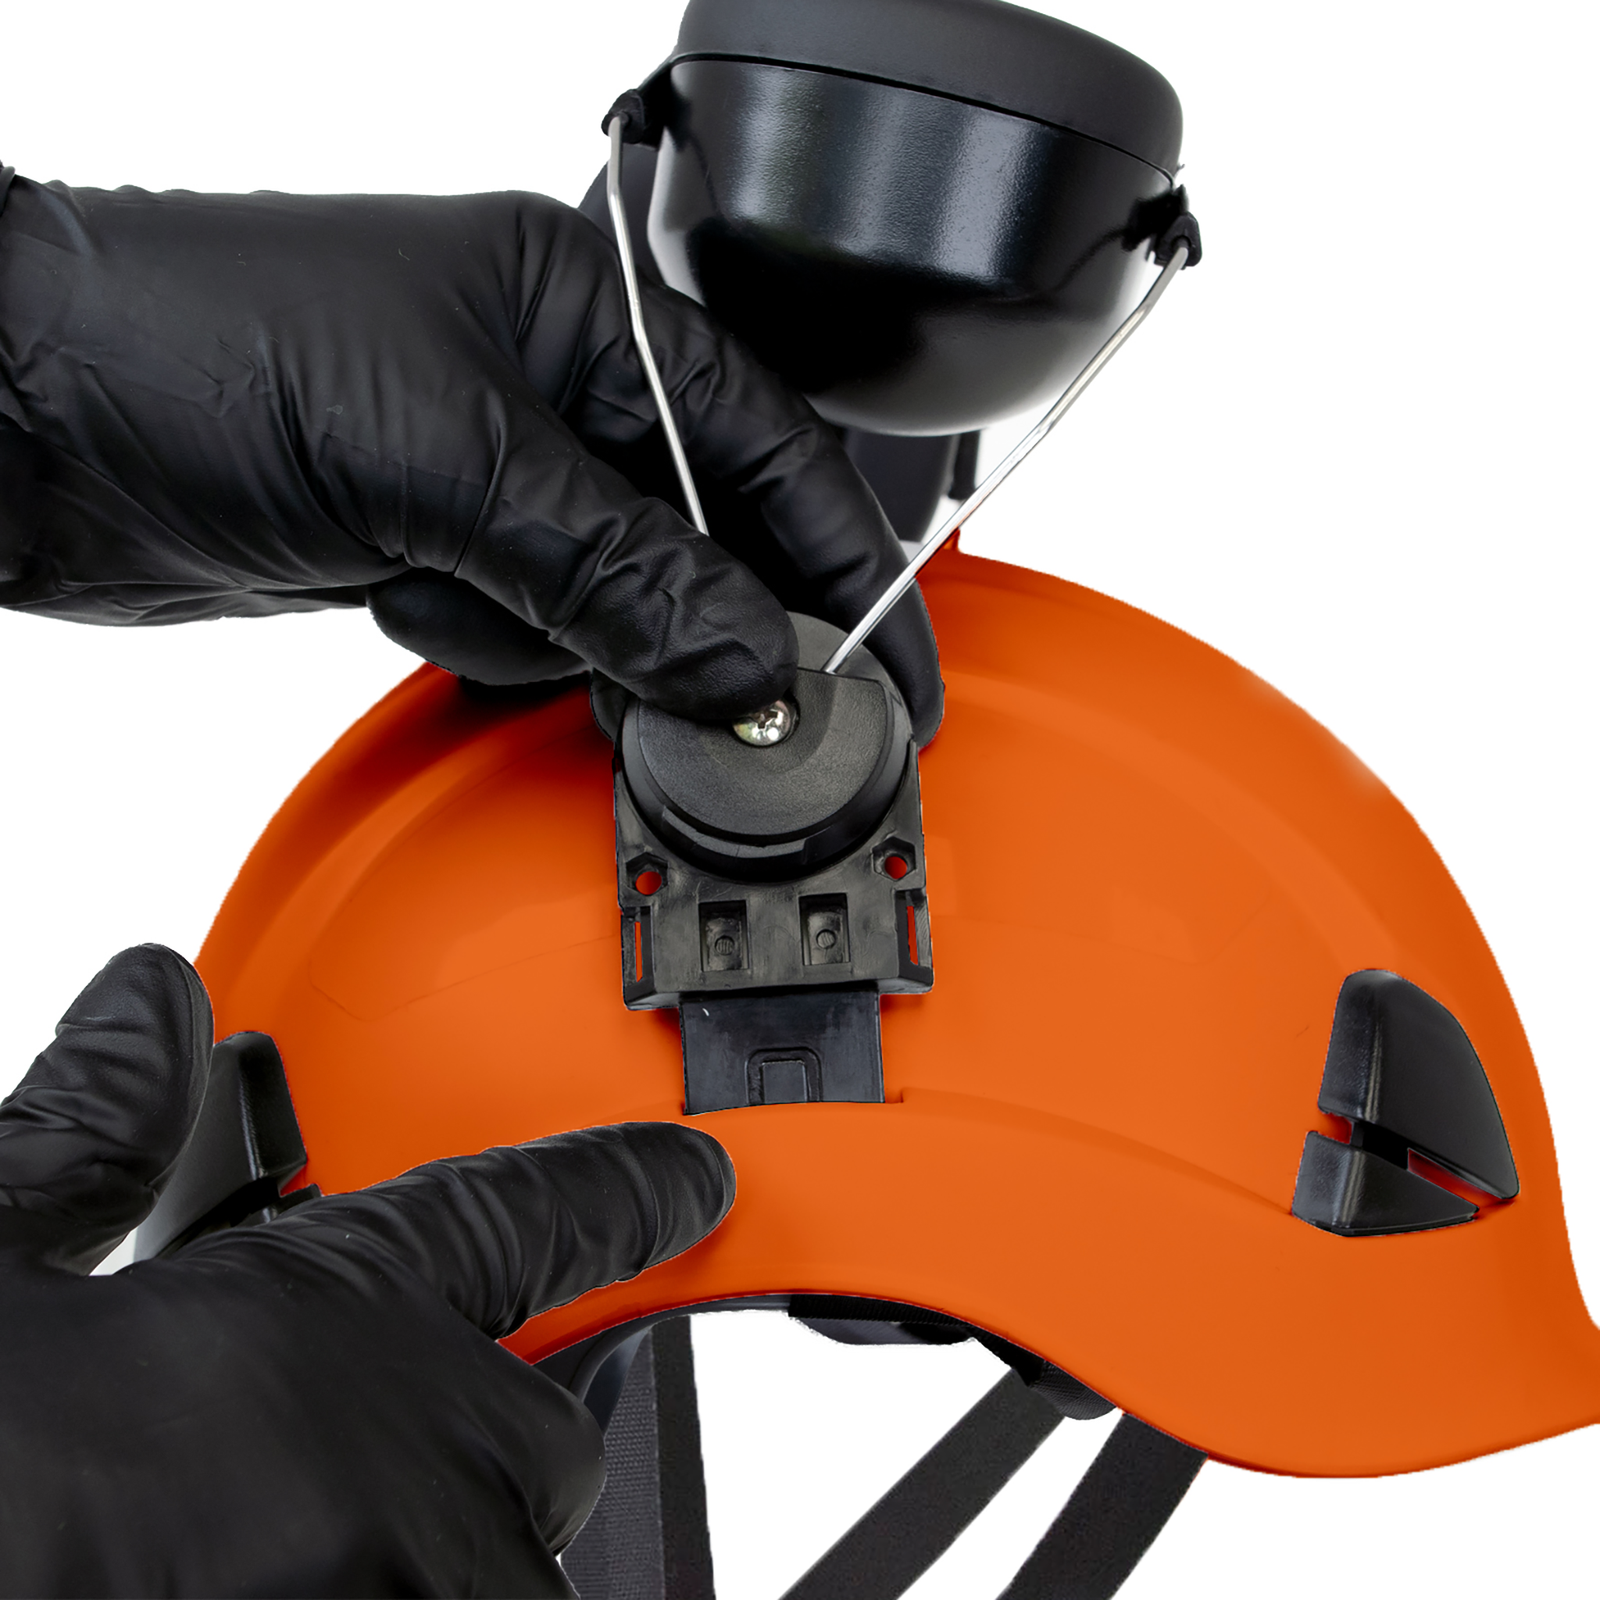 Close-up of a person mounting a pair of earmuffs onto the Jorestech orange 3-in-1 helmet